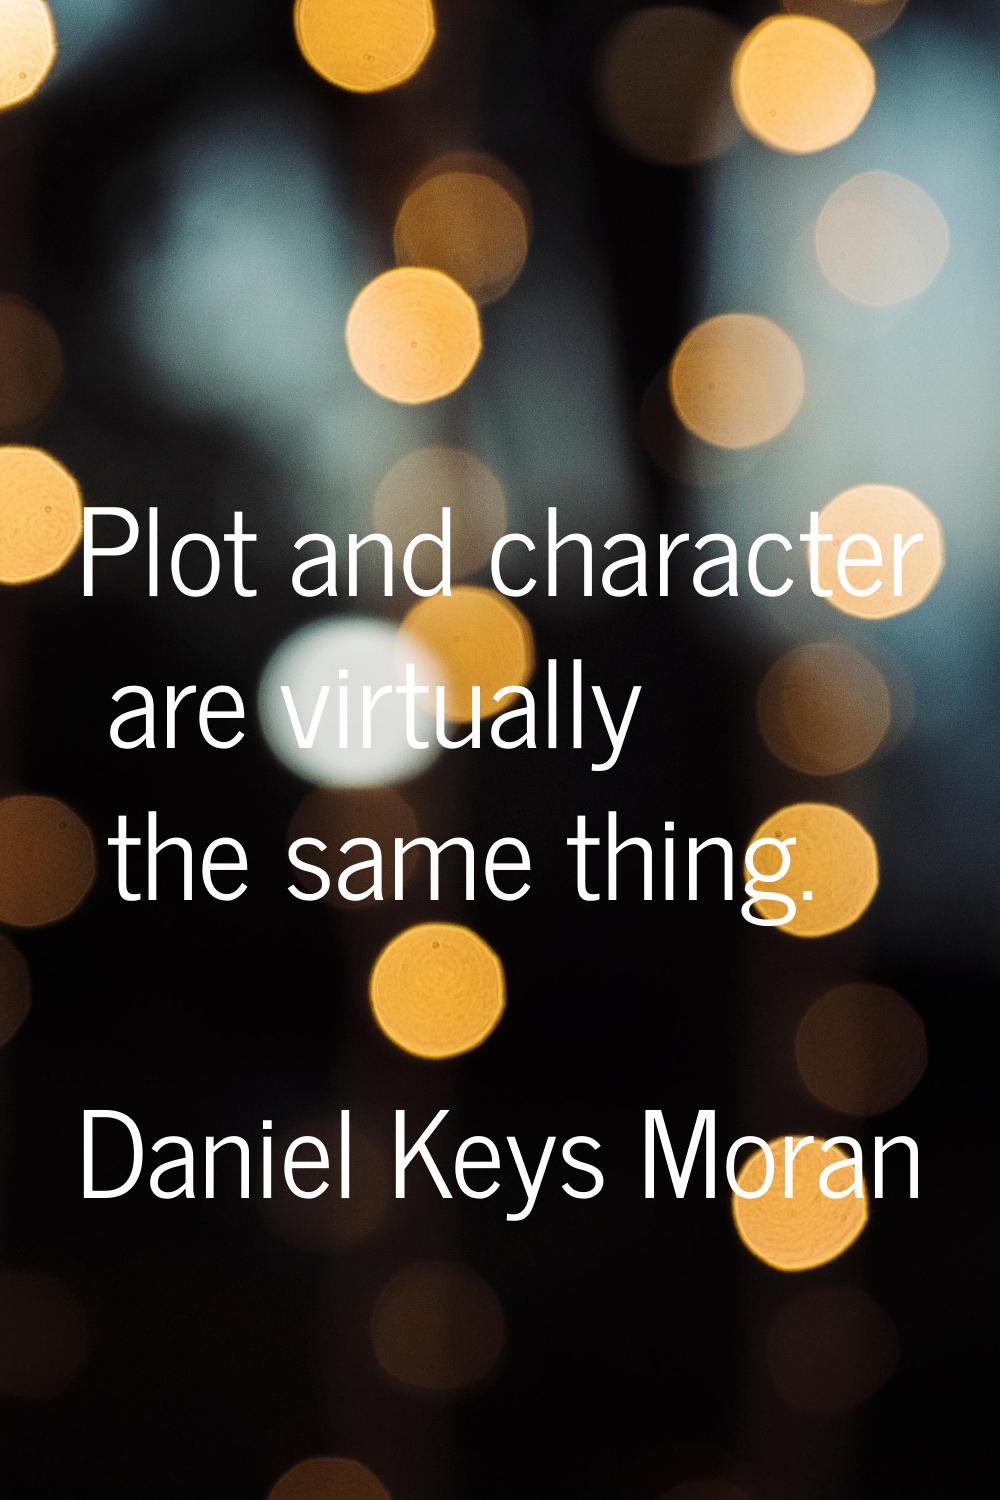 Plot and character are virtually the same thing.